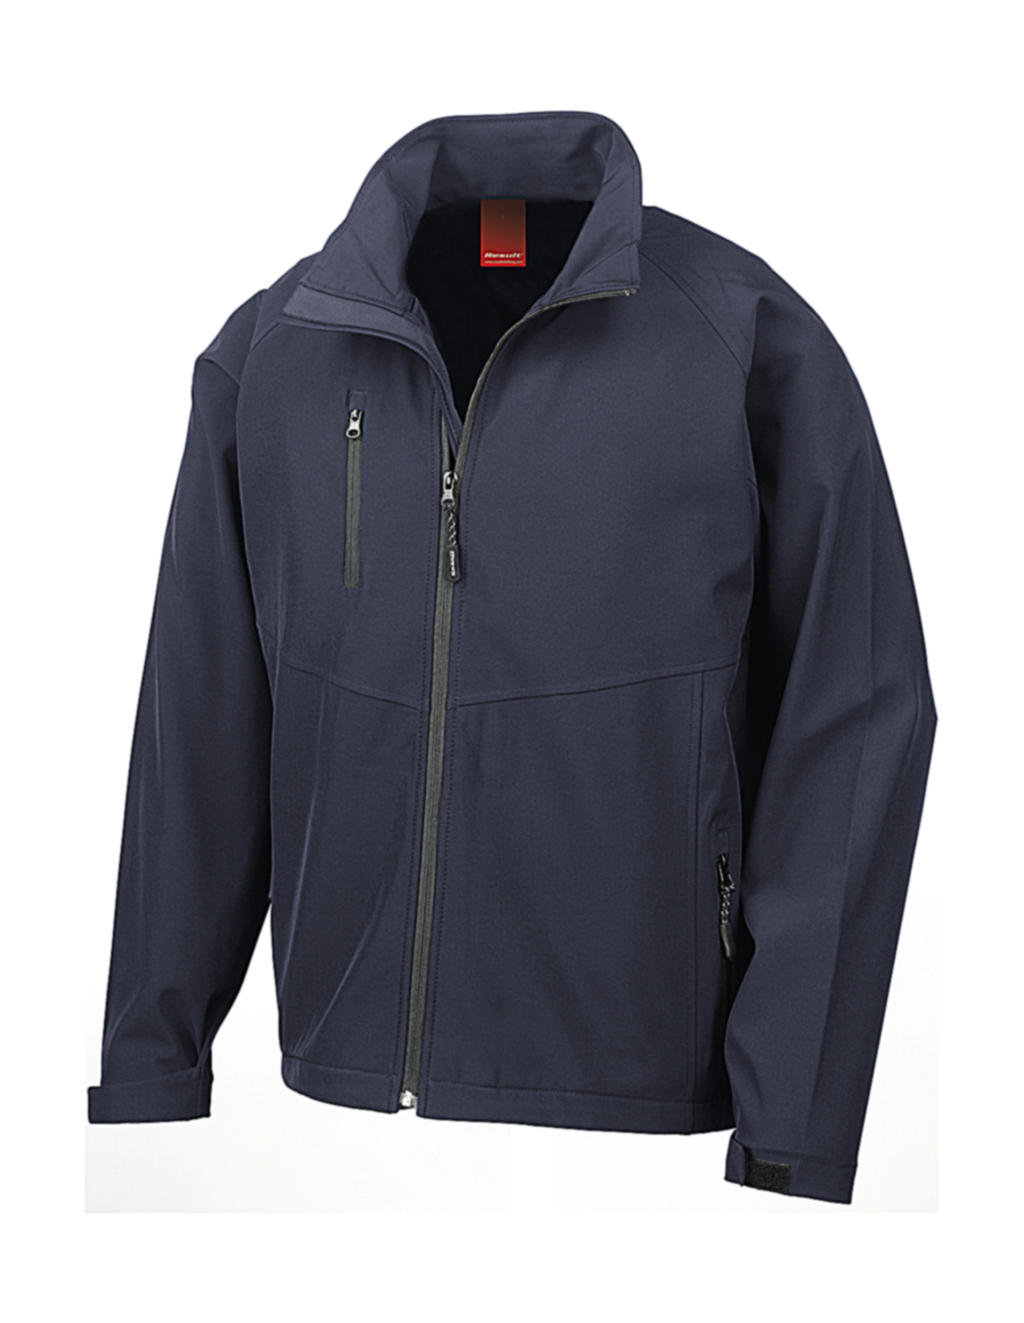  Base Layer Softshell in Farbe Navy